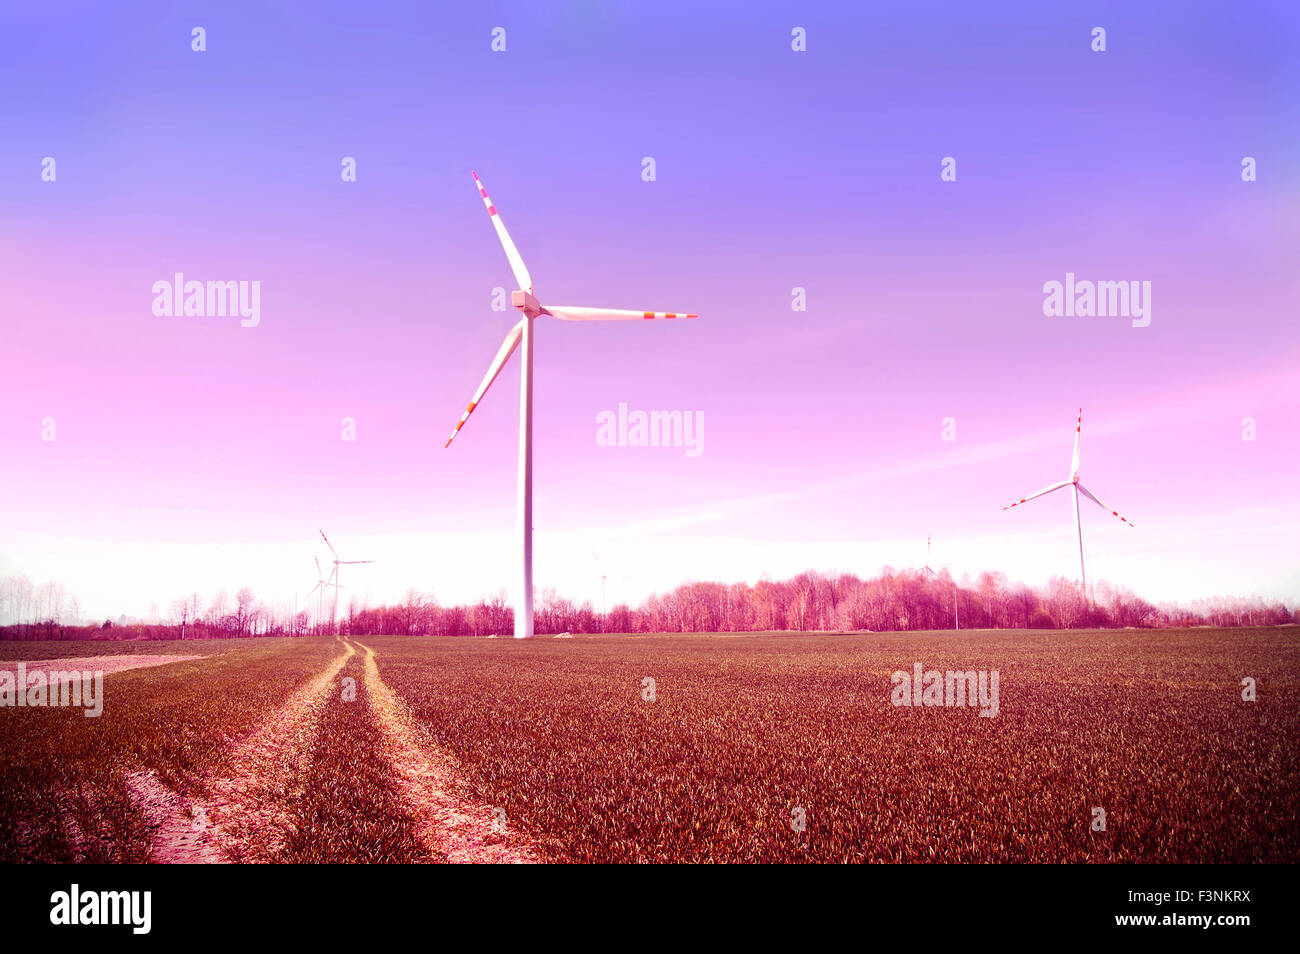 Windmills on the field. Vintage instagram picture. Alternative energy. Stock Photo